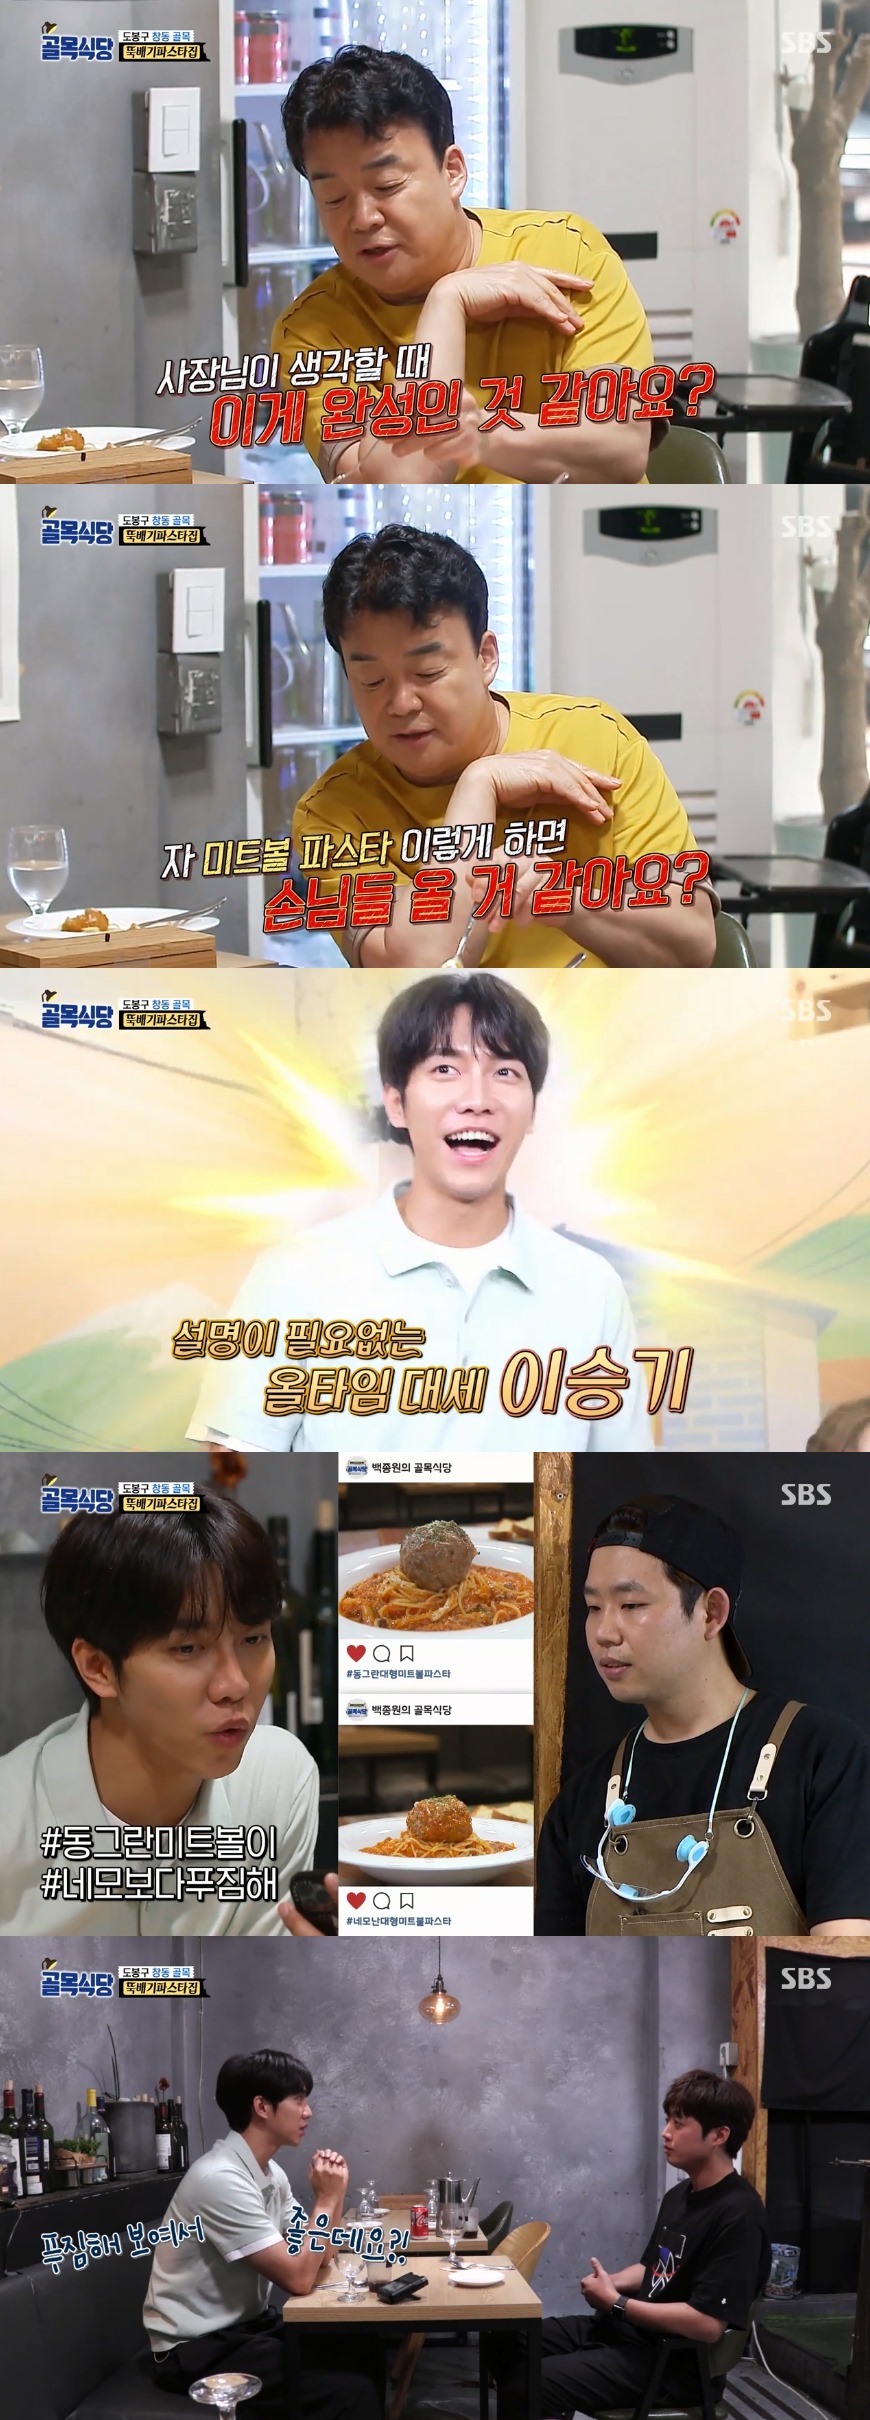 Lee Seung-gi made a surprise appearance as Chang-dong Alley Miri Tour Team.In SBS Baek Jong-wons The alley restaurant broadcasted on the 19th, the third side of Dobong District Chang-dong alley, the 25th alley, was released.On this day, the head of the Pasta house started a study of meatball Pasta. Baek Jong-won pointed out that the taste is good but the personality of the boss is lacking. Is meatball satisfied with this?If you post a later photo on SNS, do you think (Mitball) will catch peoples attention? He urged me to change the shape of meatball in a unique way.The person who invited me today is my brother in the neighborhood, and I am actively trying to save the neighborhood, said Baek Jong-won.Lee Seung-gi appeared as a Miri Tour and attracted attention. Lee Seung-gi said, I spent my childhood in Dobong District.After his debut, he lived in Chang-dong for about a year. I visited because of shooting today, and I have a lot of old thoughts. Lee Seung-gi also said, I admire teacher Baek Jong-won.I had a chance to go to the Baek Jong-won teachers house, confessions fans for Baek Jong-won.Lee Seung-gi, who received a special mission from Baek Jong-won, visited the Ttukbaegi Pasta house for a tasting car.Lee Seung-gi saw an upgraded meatball pasta and left a certification shot after tasting the cheddar cheese meatball, saying: Its delicious; its OK because its big.It looks good. Pasta sauce was praised as a sauce that I want to eat rice. Lee Seung-gi, after a stormy meal for a while, laughed, saying, Its delicious enough to know what is lacking. Do you have to tell the problem? Its just delicious.Lee Seung-gi then laughed after realizing Arancini Cream Pasta after realizing This is Arancini.In the past, Lee Seung-gi made Arancini in Little Forest, and the children had a lot of dislike.Lee Seung-gi praised Arancini Cream Pasta for saying, My favorite CreamPasta taste.As for Arachini, he advised me to add more rice, saying, I feel less rice than cheese.Kim Sung-joo and Jeong In-sun of the Seodanggae Association visited the chicken gangjeong house and delivered their opinions. The two informed the bosses about the difference between sugar and starch syrup and made them boil themselves as Baek Jong-won said.Also, the two bosses noticed that garlic was a problem, as Baek Jong-won said last week.I smelled sour like a pickle, but I thought it smelled like this in raw garlic, the bosses said.Baek Jong-won, who appeared in the store and smelled garlic, said, Why did not I use garlic that I made? I did not care about the food I made.You dont know the principle of making sauce. Its embarrassing. If you dont keep the basics, its all a play.Photo = SBS Broadcasting Screen